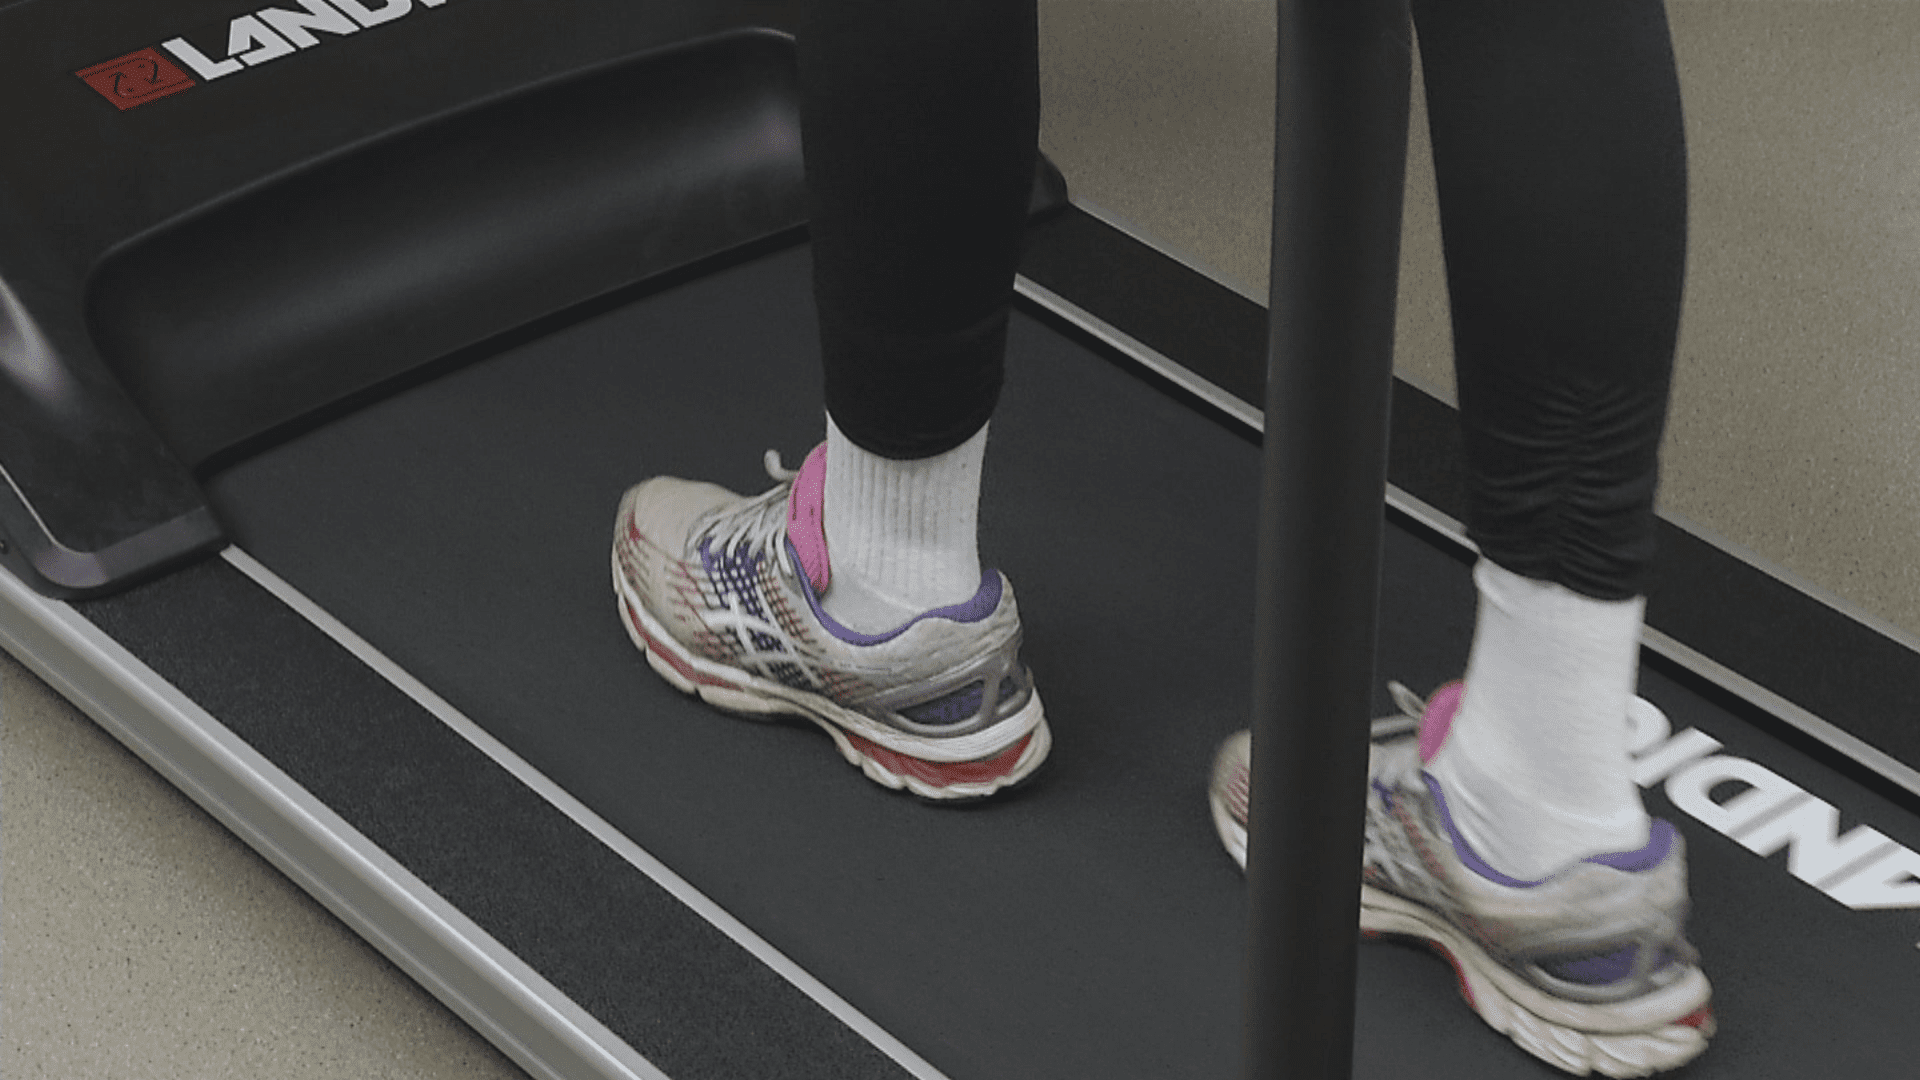 Physical exercise is associated with survival among breast cancer survivors, new Roswell Park study finds